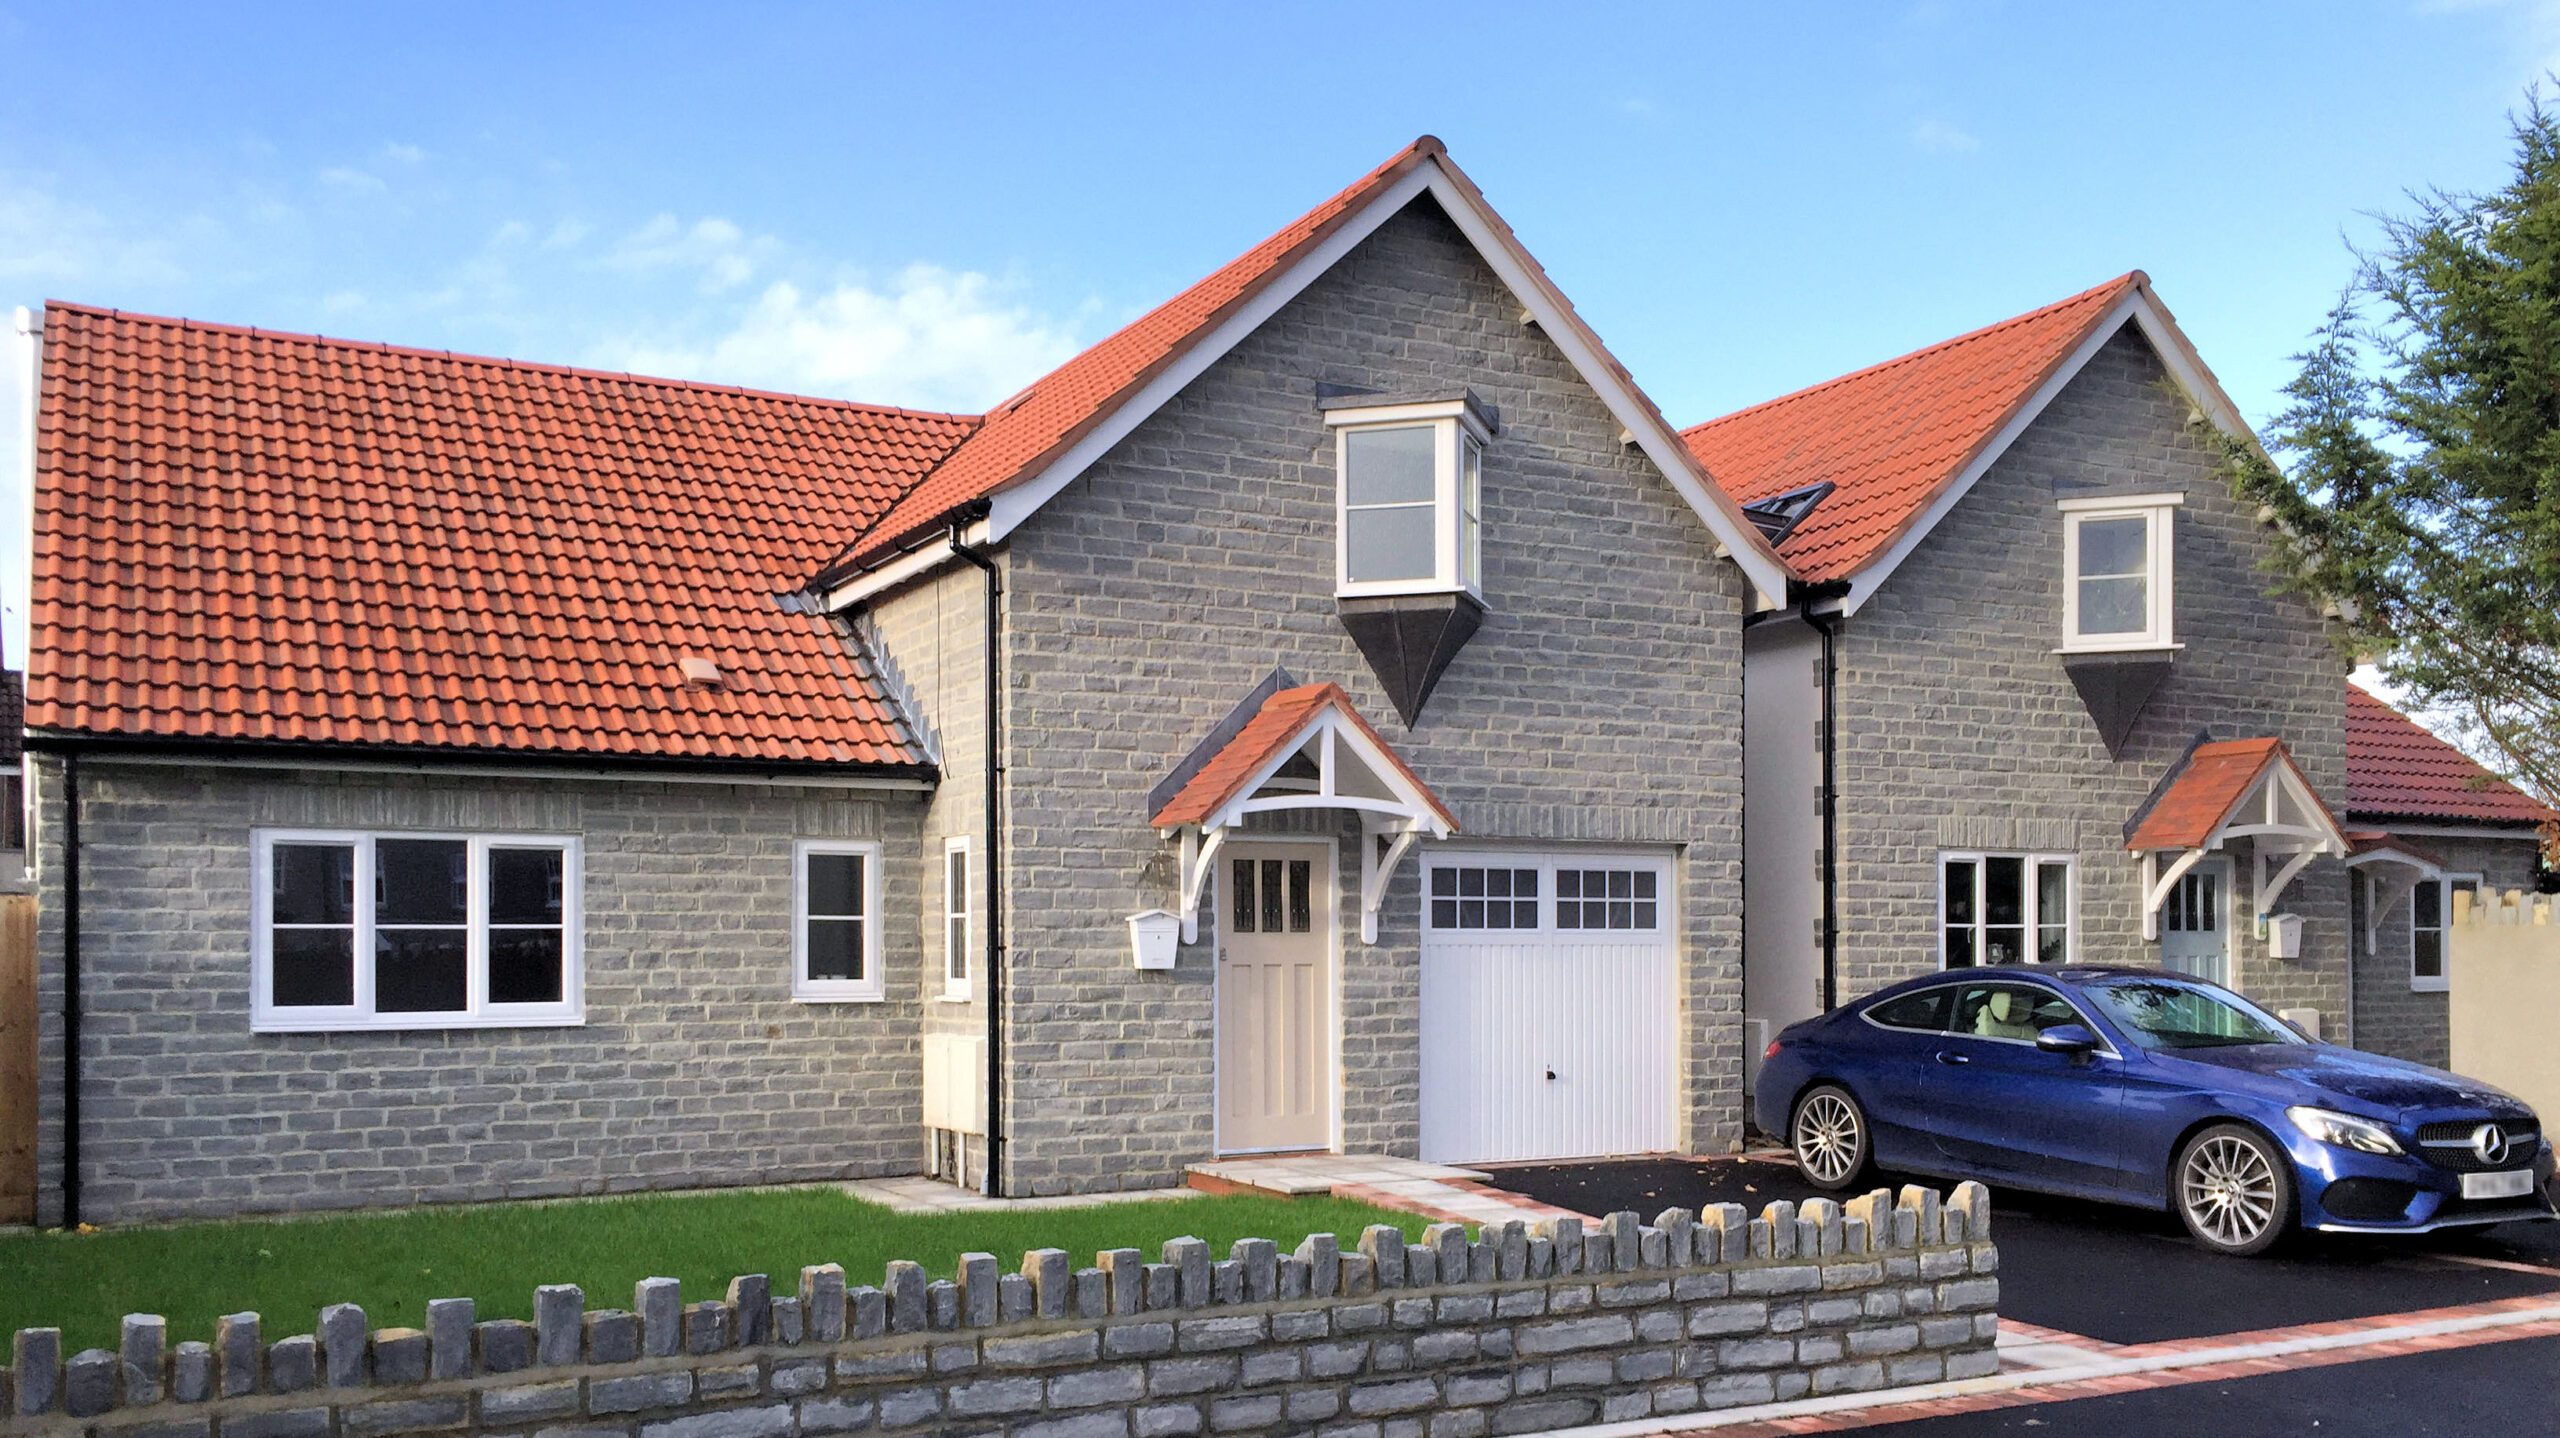 Small residential development in Somerset